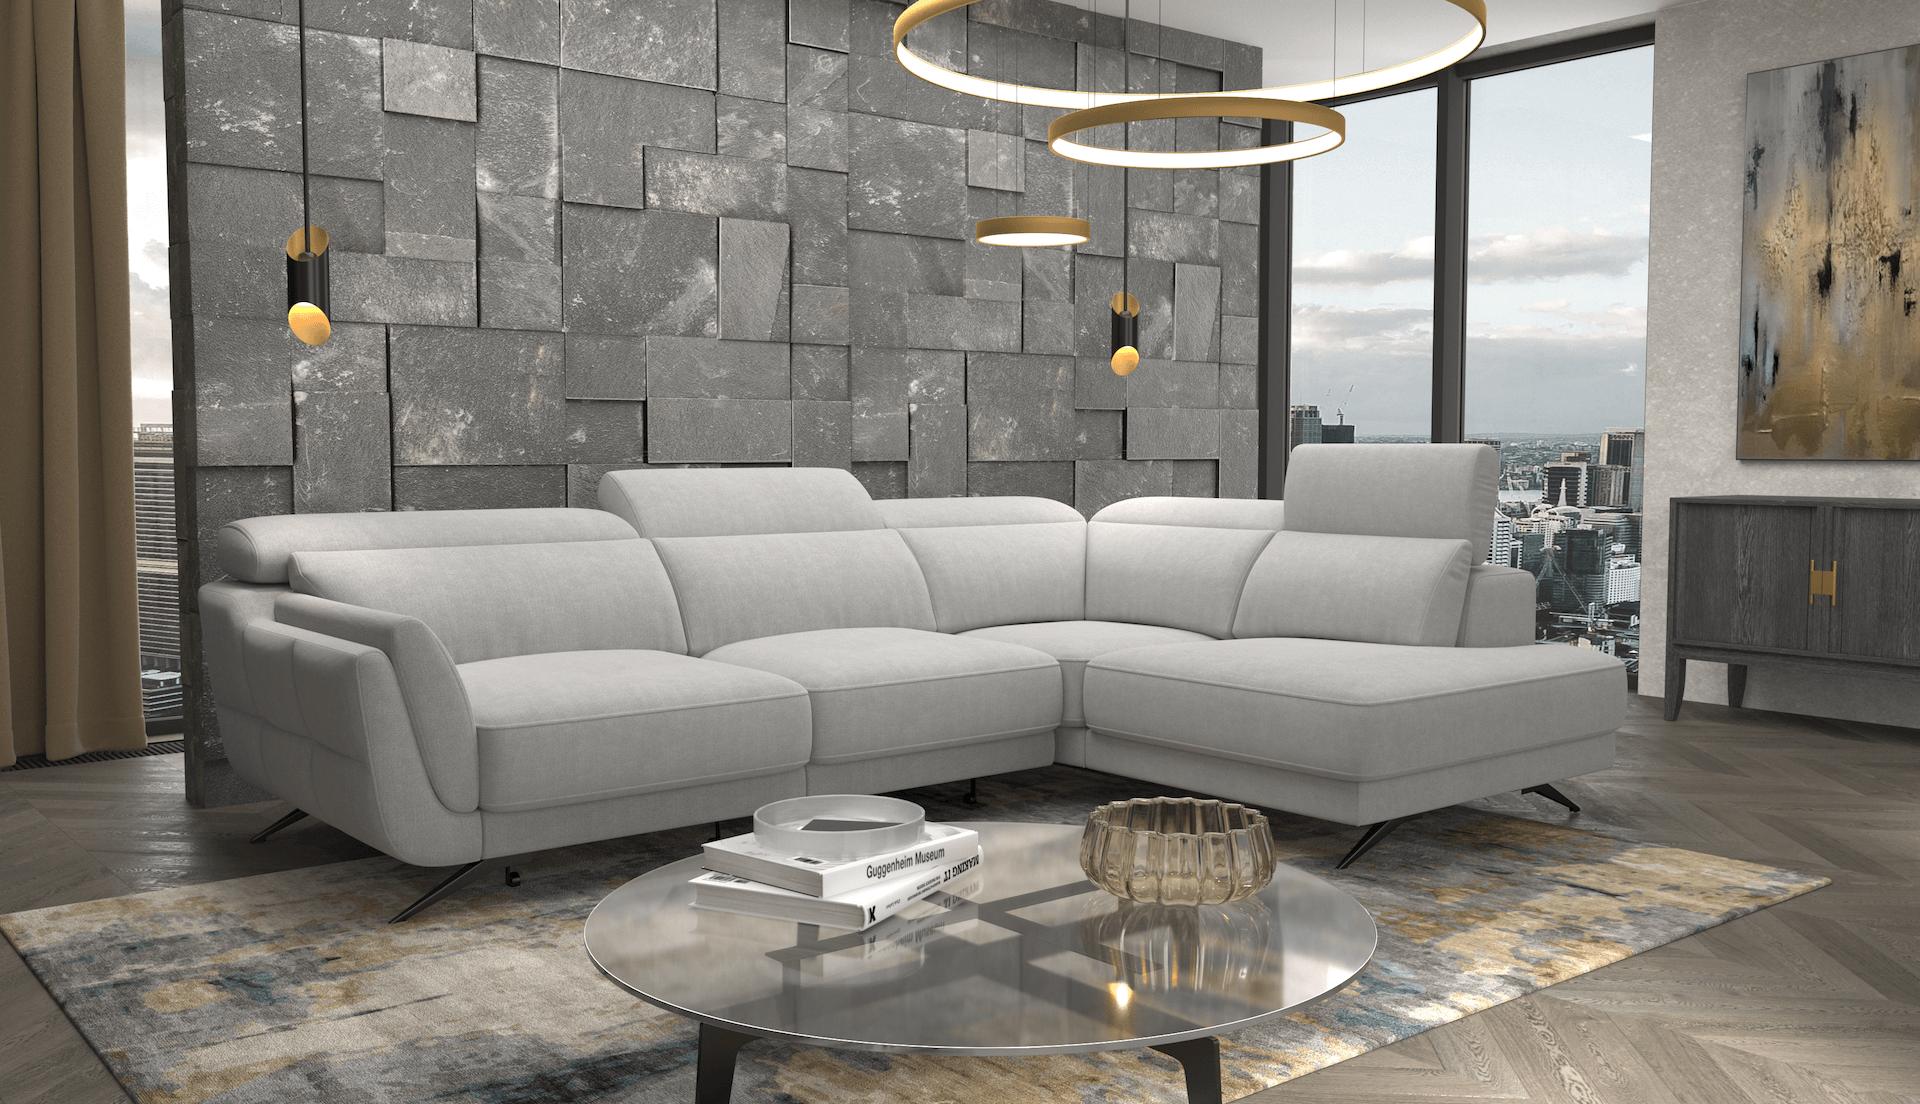 

    
Ronda-Grey-Sectional-Sofa-RC Contemporary Light Grey Wood Sectional Sofa Right Bumper Chaise Modekraft Ronda Ronda-Grey-Sectional-Sofa-RC
